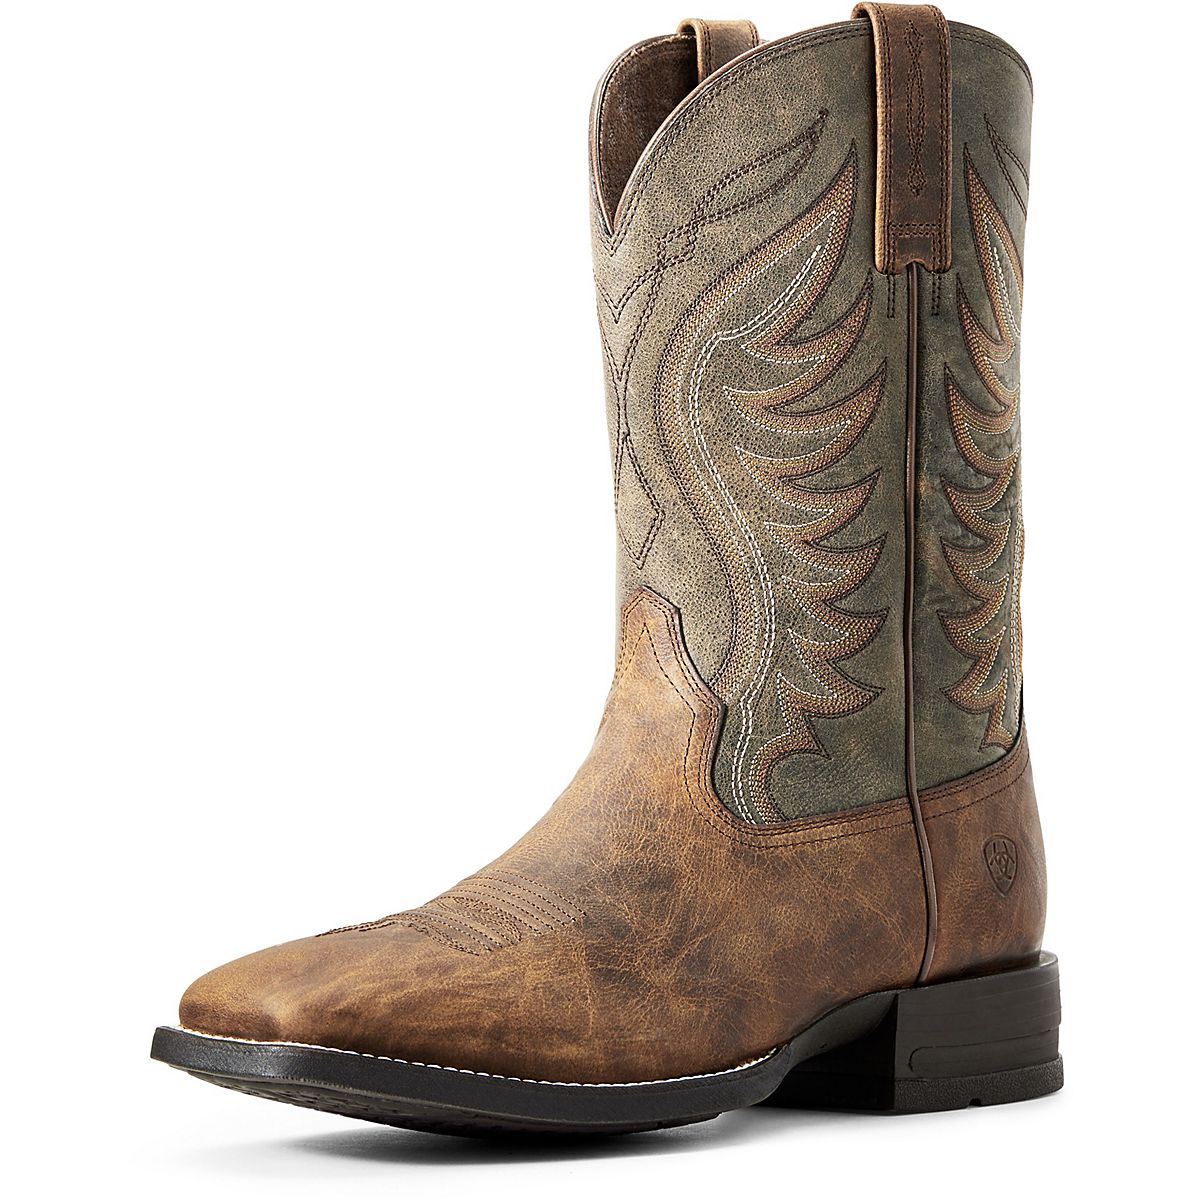 Ariat Men's Amos Boots | Free Shipping at Academy